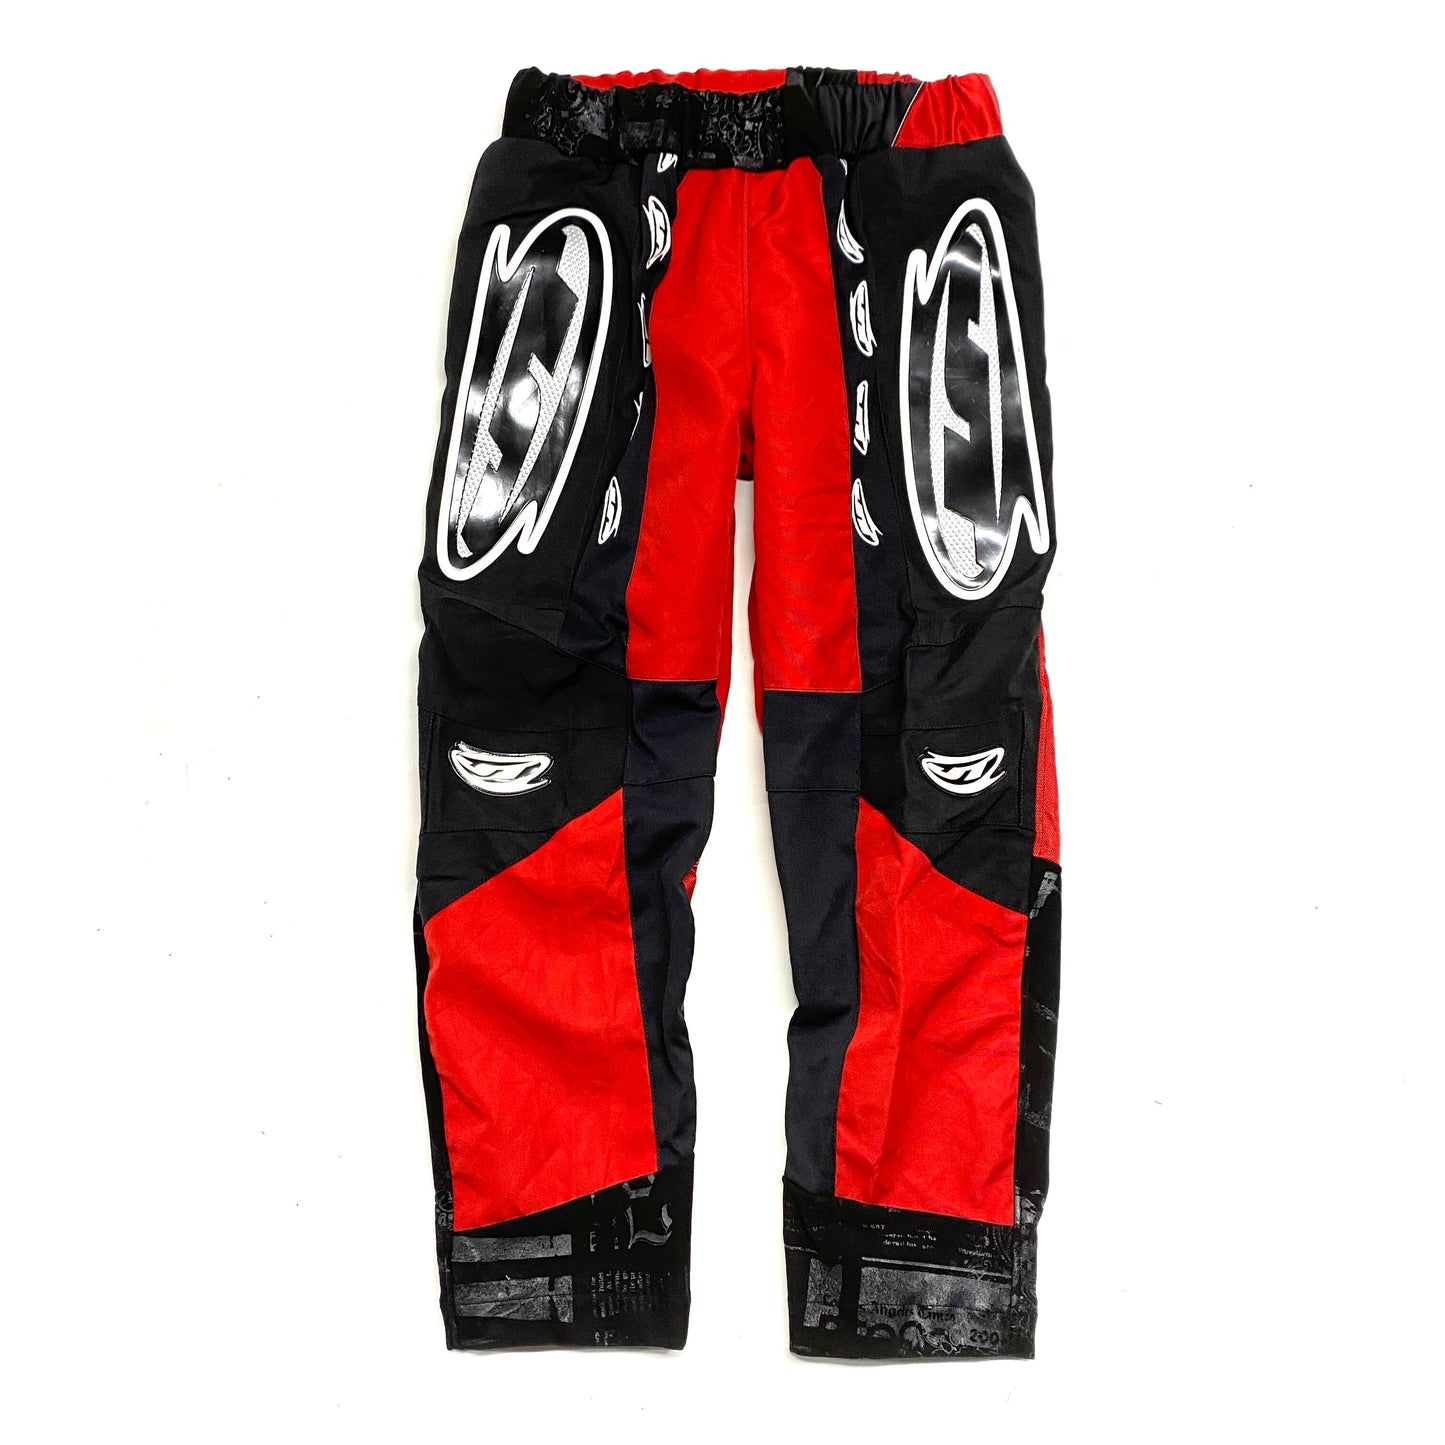 Red Bespoke Hypebeast Japanese Vintage Handmade Custom One and Only One Cote Mer Upcycle Sustainable Street Fashion Sports Jersey Motorcycle Biker Rider Pants Bottoms ( Size : XL )